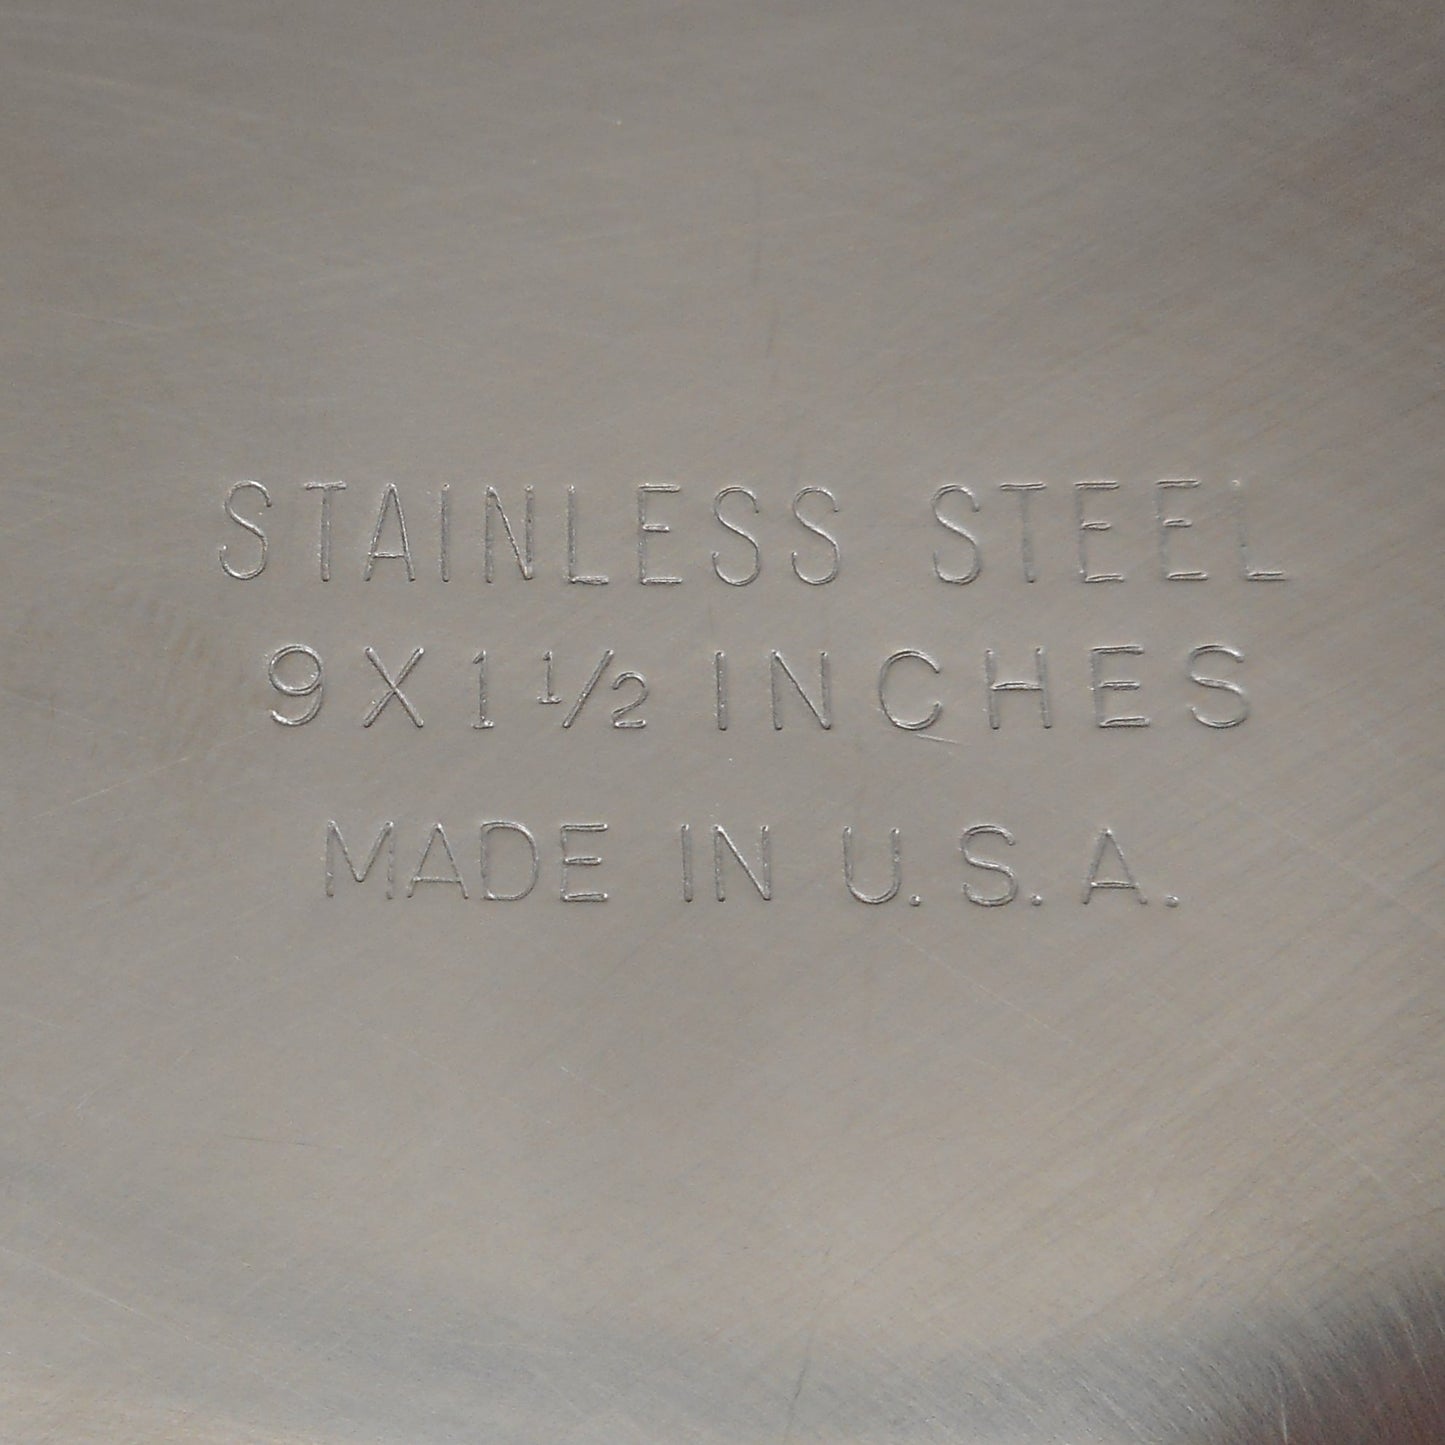 USA Stainless Steel Round Cake Pans 9" x 1-1/2" West Bend maker marked